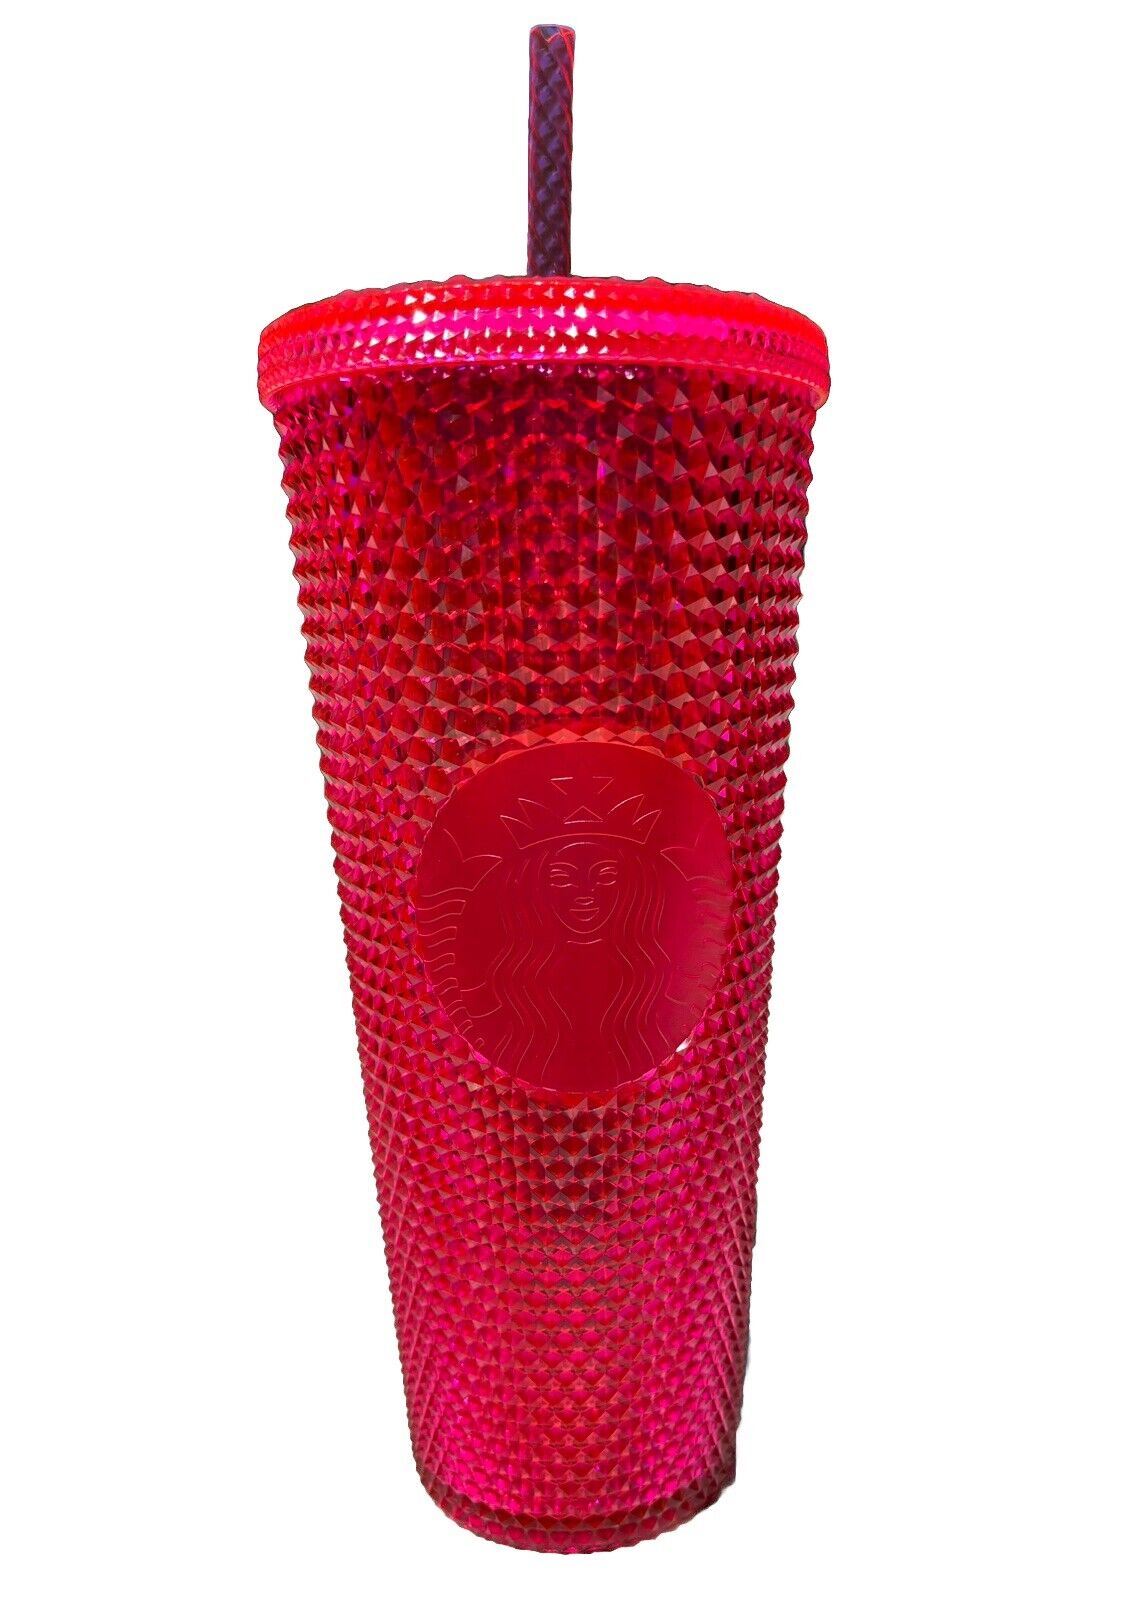 2019 Starbucks Hot Pink Studded Tumbler Cold Cup & Straw 24 oz Venti New NWT